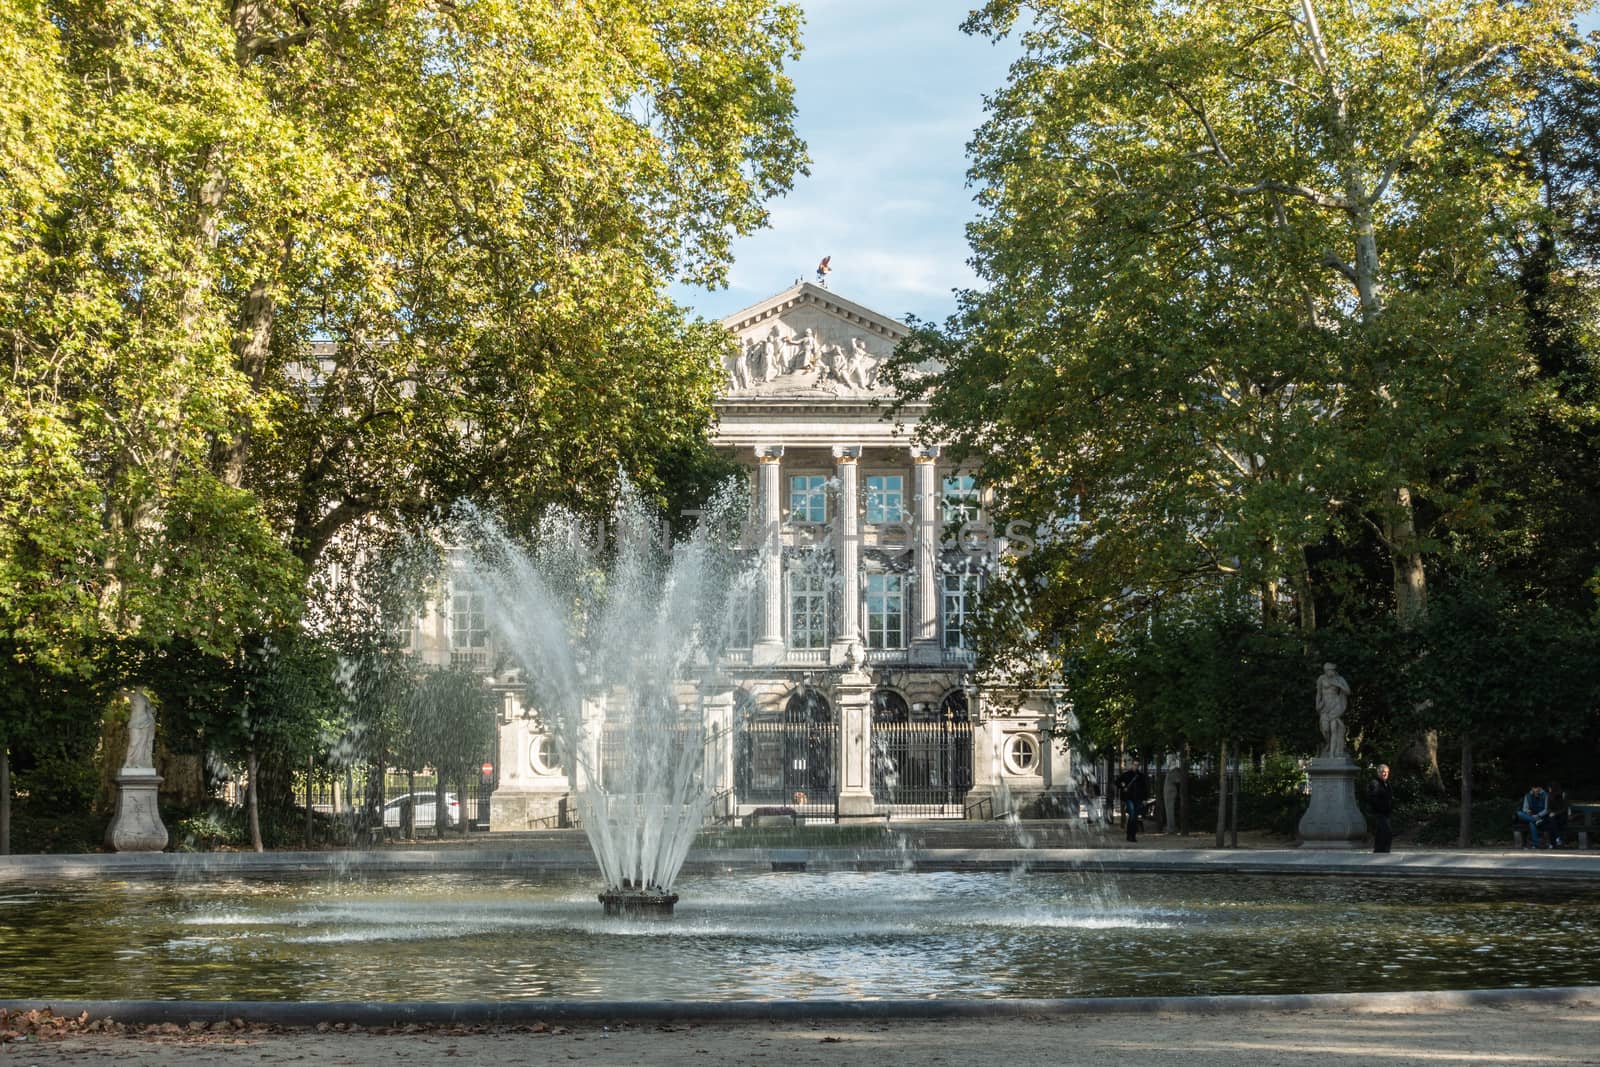 Brussels, Belgium - September 26, 2018: Fountain in Park of Brussels partly obscures facade of Belgian Parliament. Green foliage, statues and people on bench.